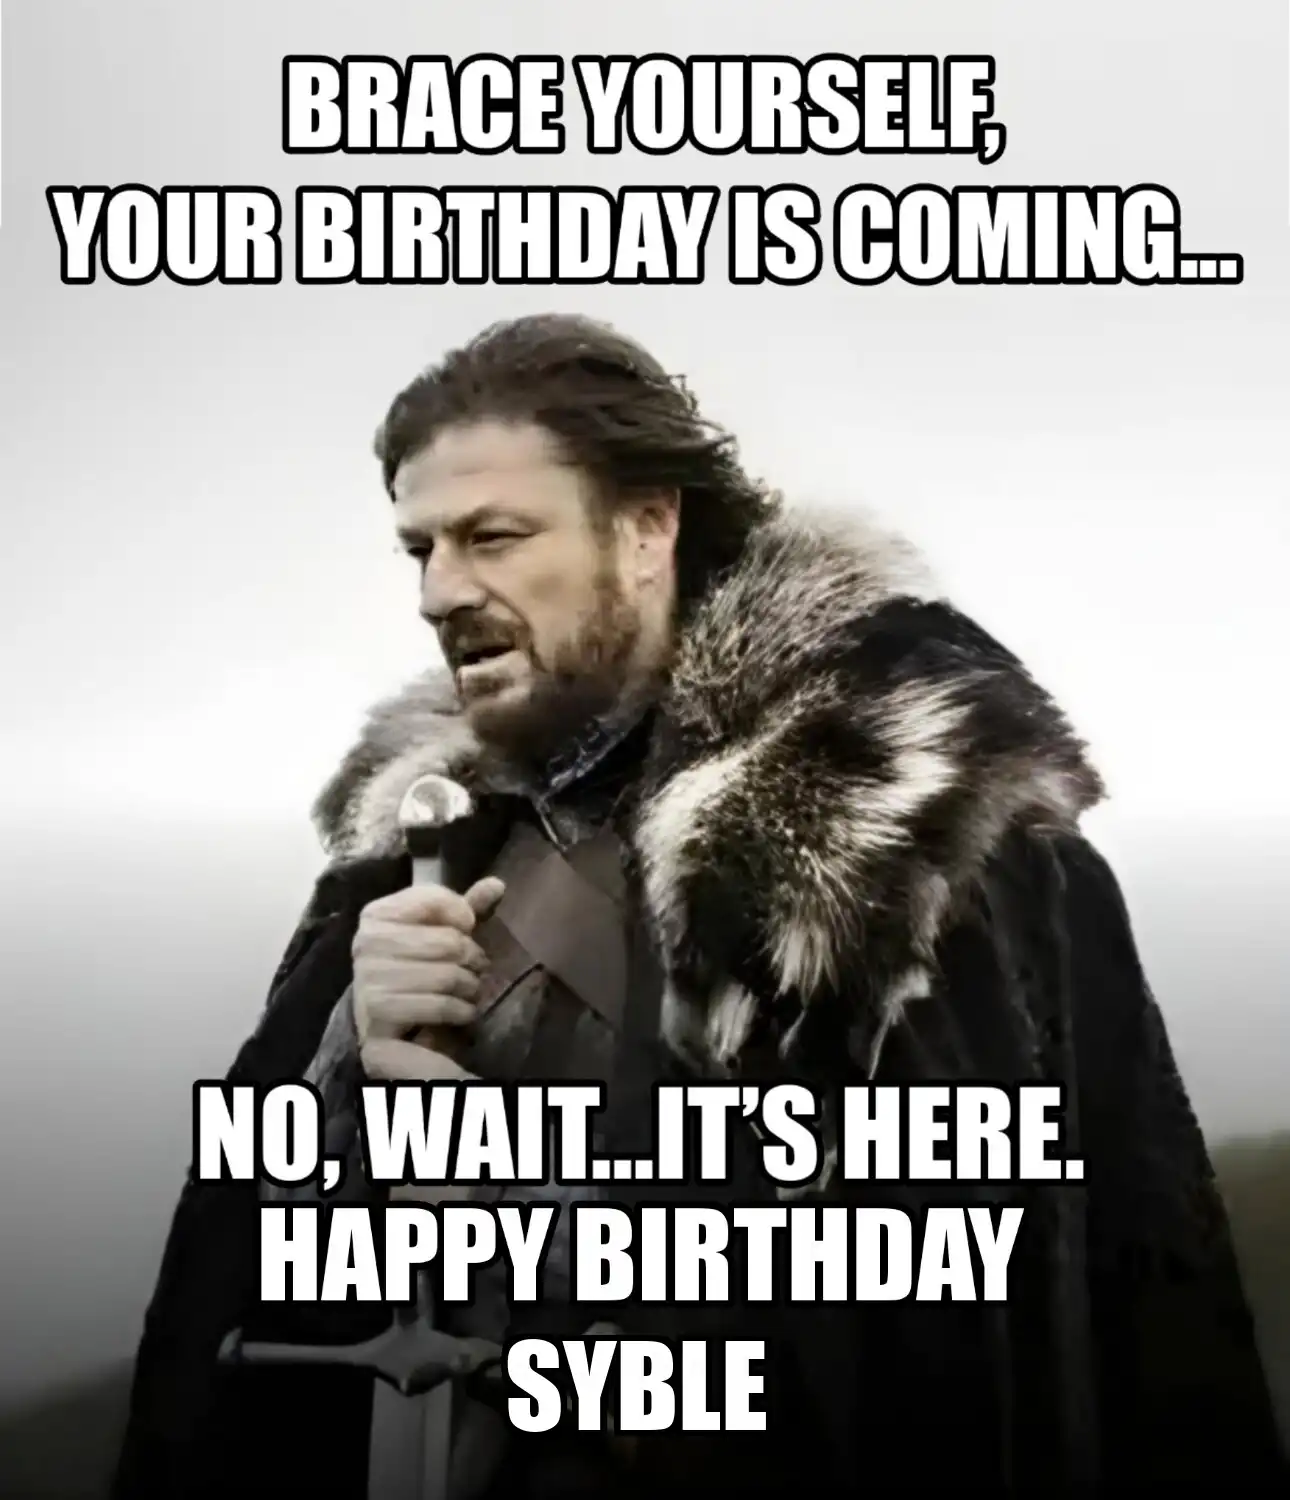 Happy Birthday Syble Brace Yourself Your Birthday Is Coming Meme